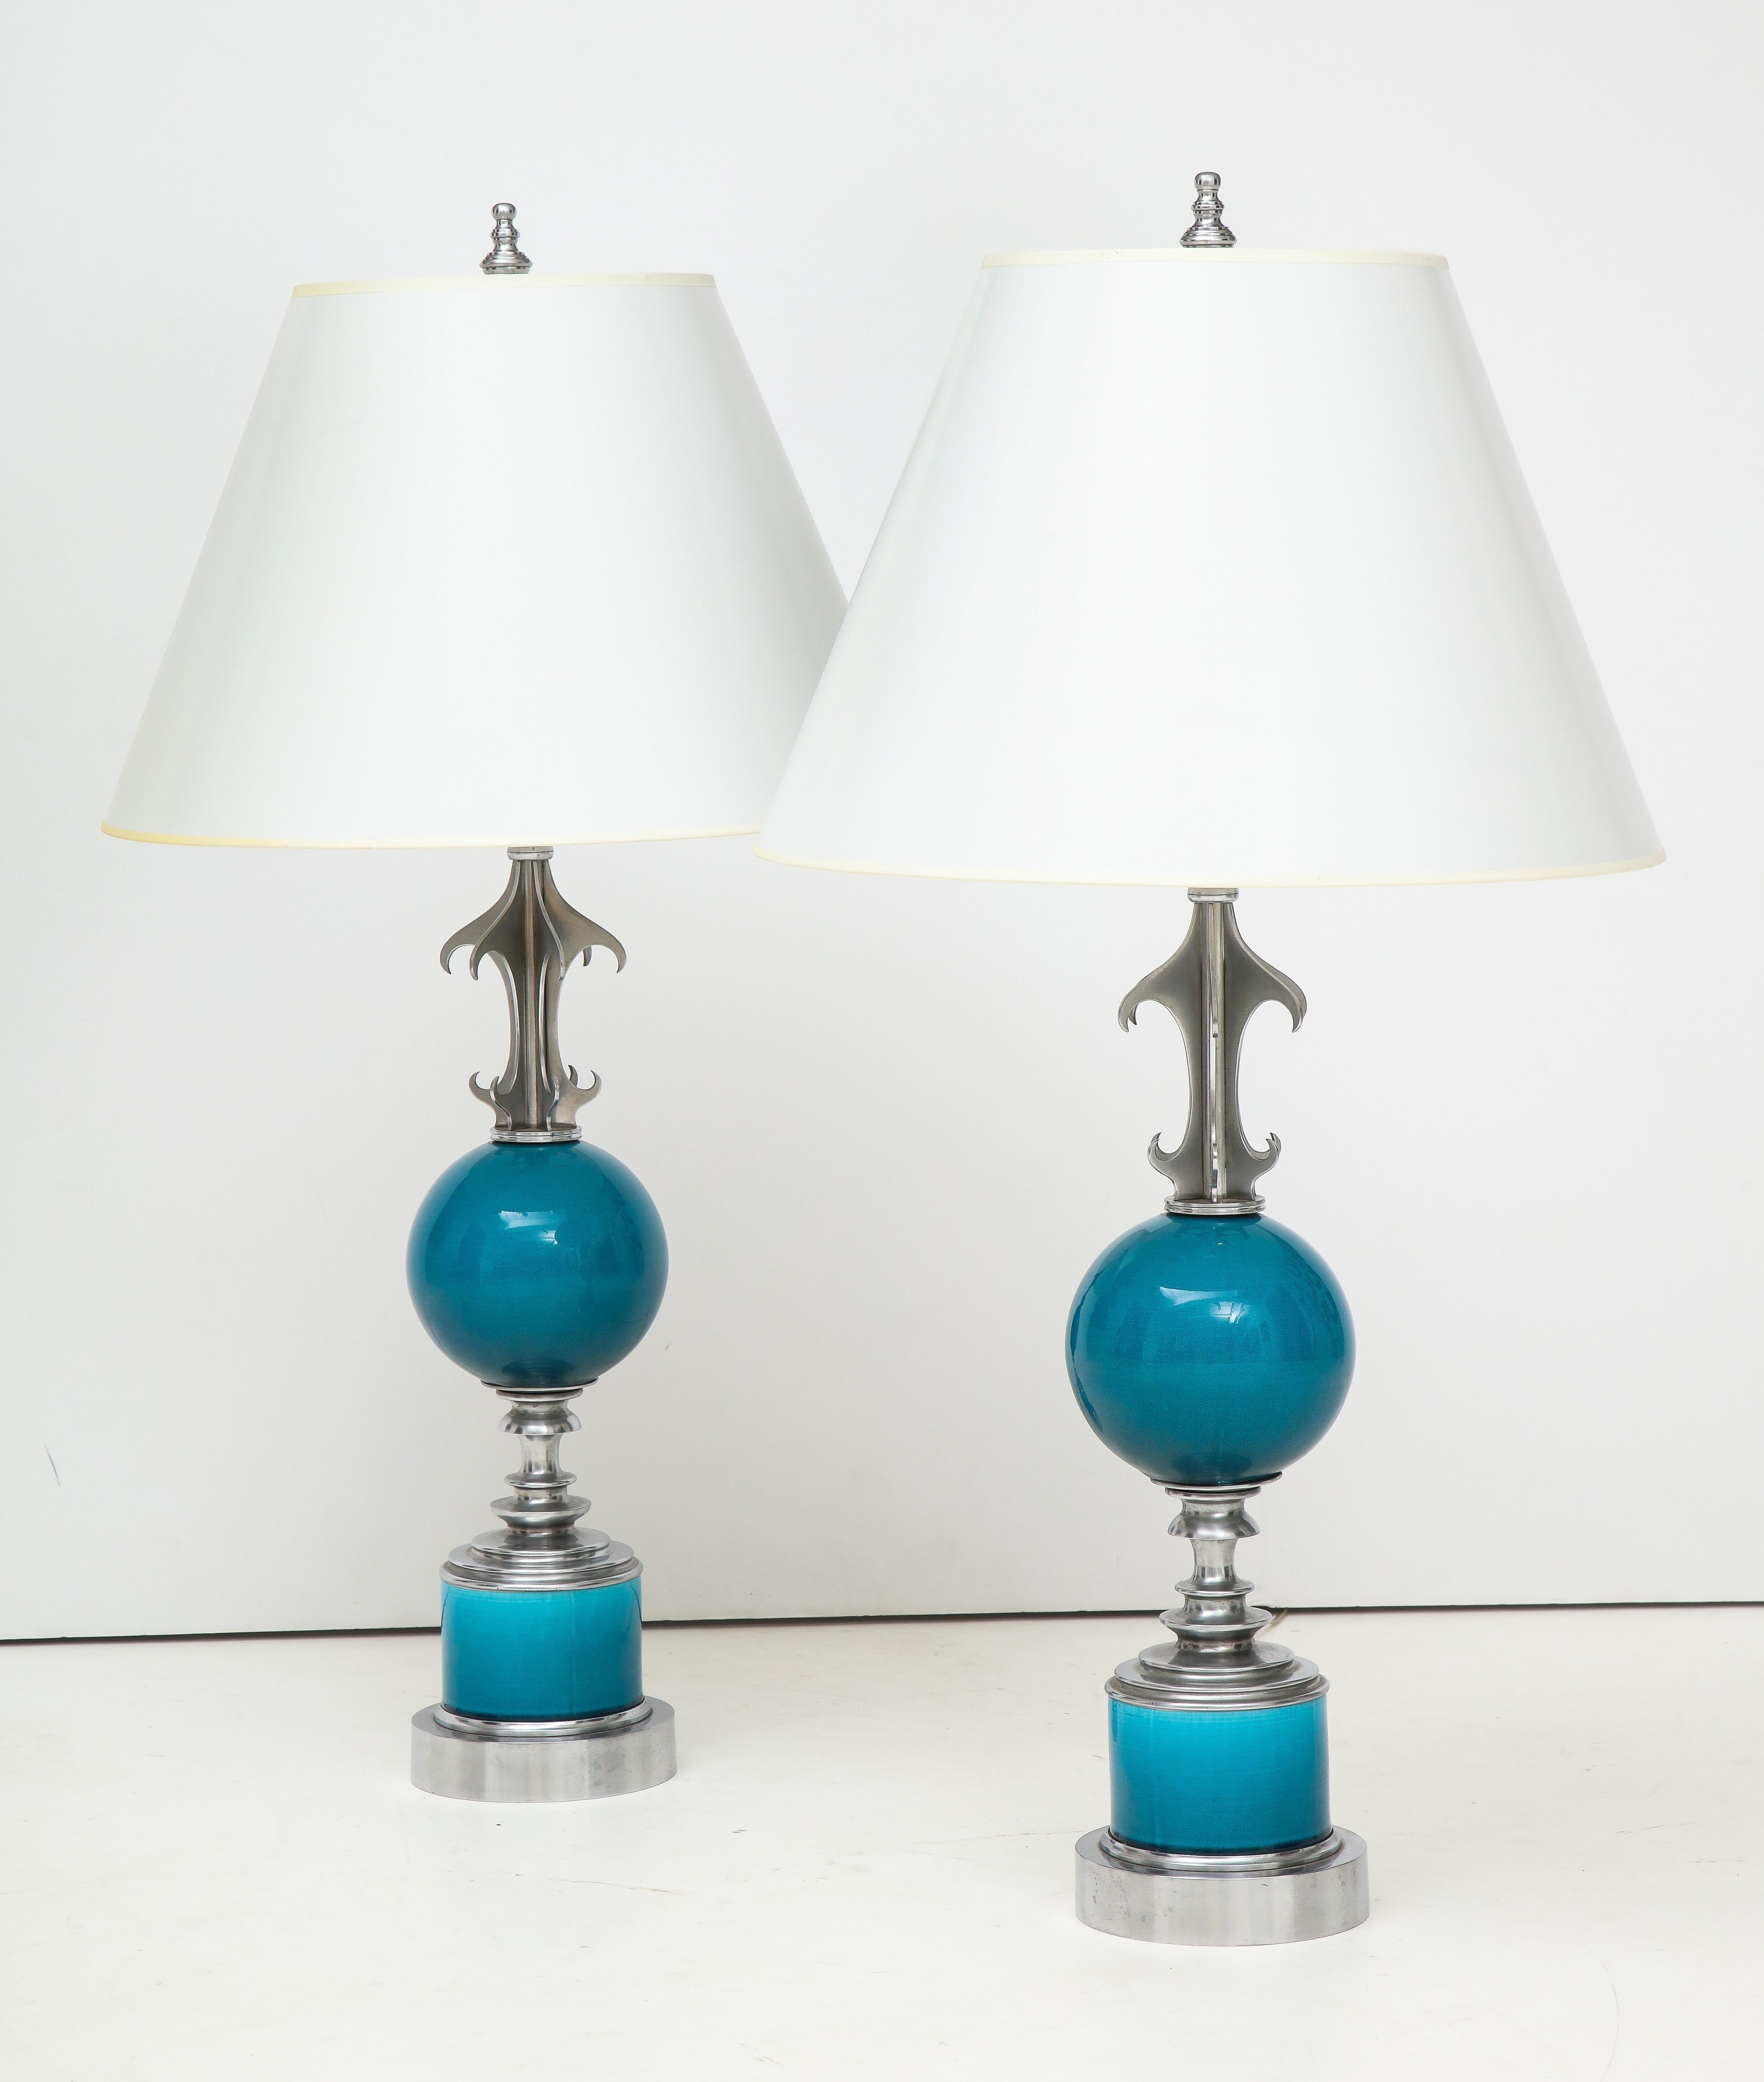 Pair of Blue Ceramic and Nickel-Plated Metal Table Lamps For Sale 5